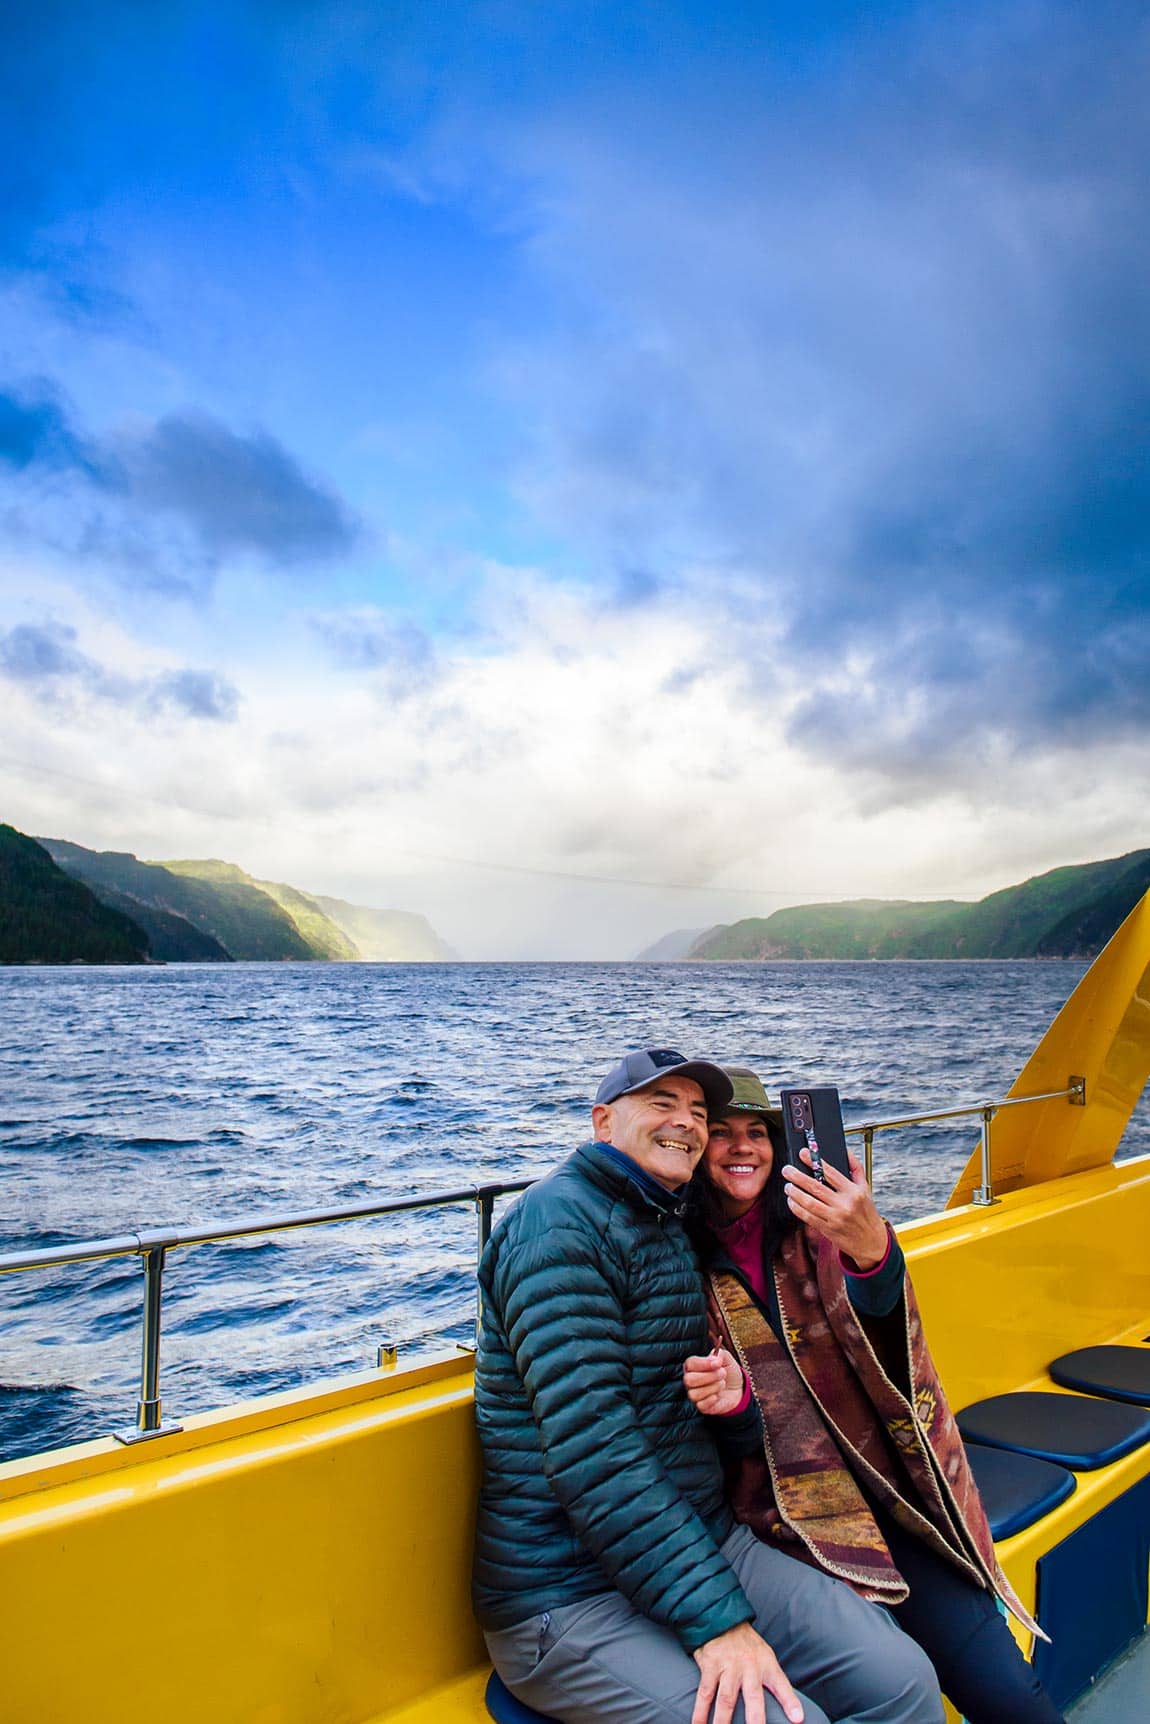 fjord-du-saguenay-croisiere-navettes-maritimes-fsii-simplement-spectaculaire-canopee-2020-2